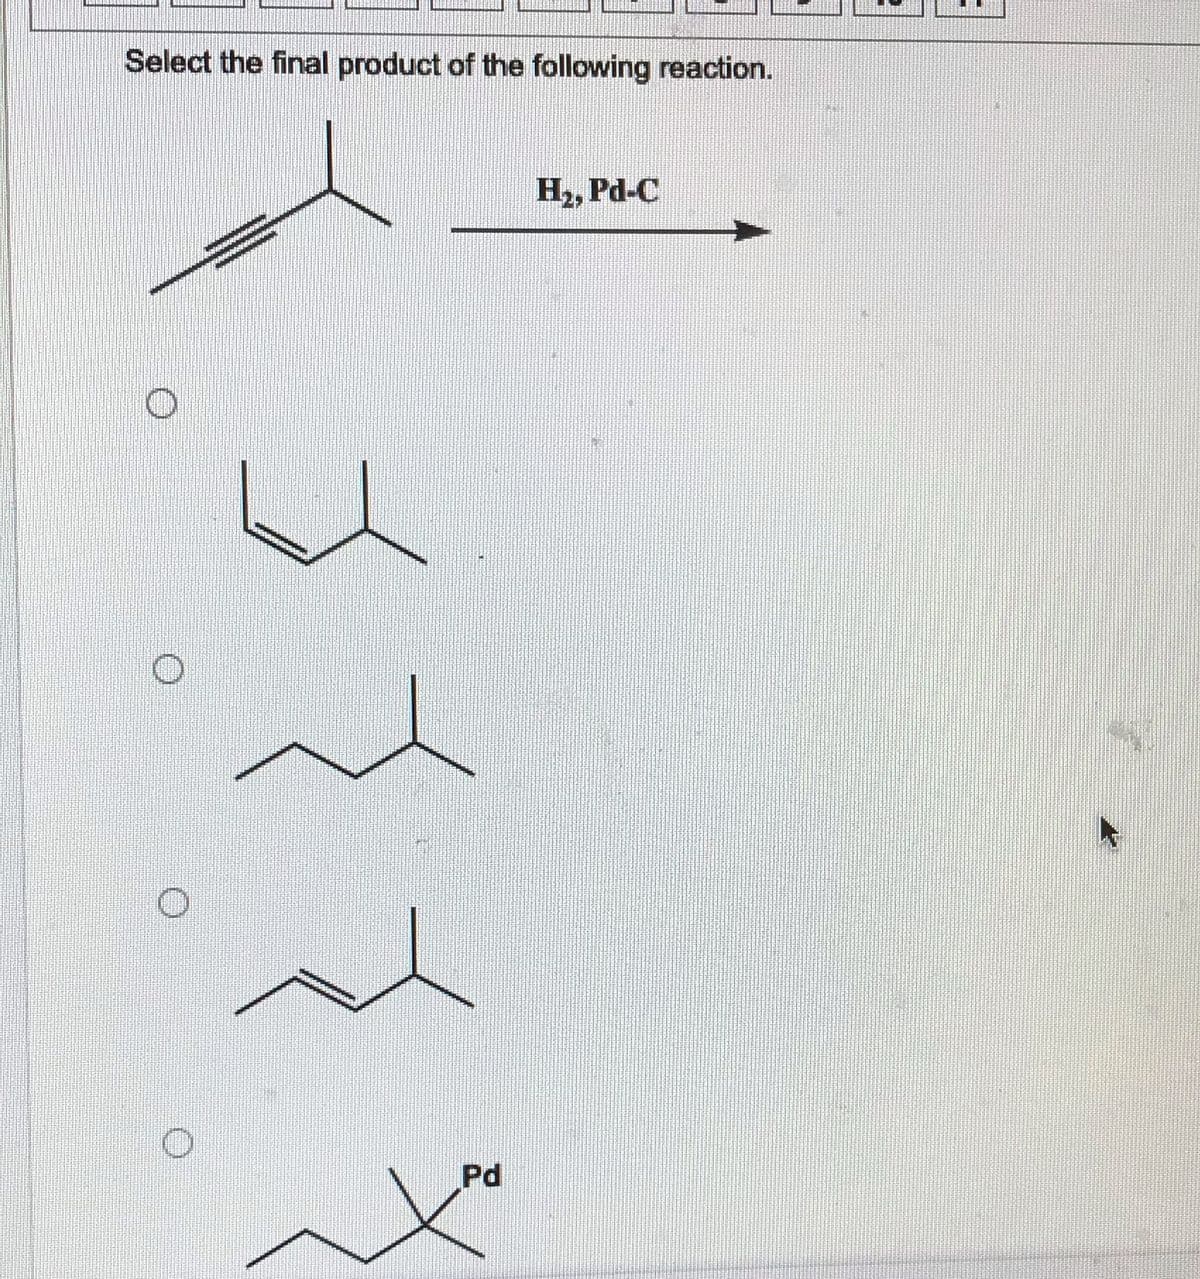 Select the final product of the following reaction.
H₂, Pd-C
3
Pd